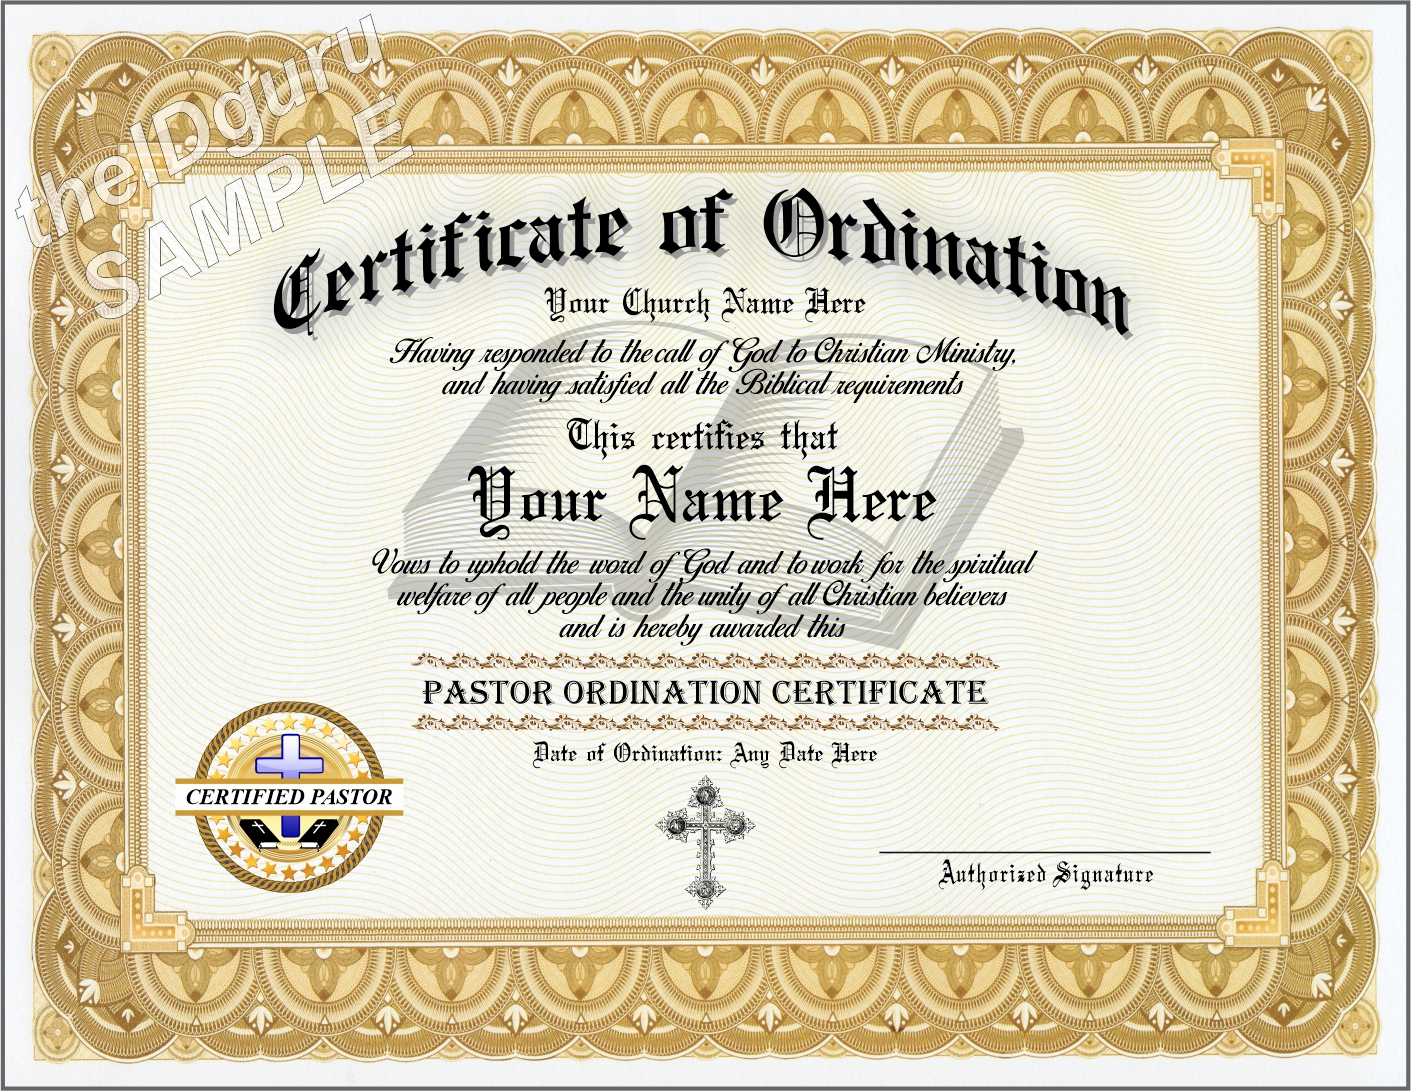 Ordained PASTOR Certificate Custom Printed With Your Information And Church LOGO The Id Guru